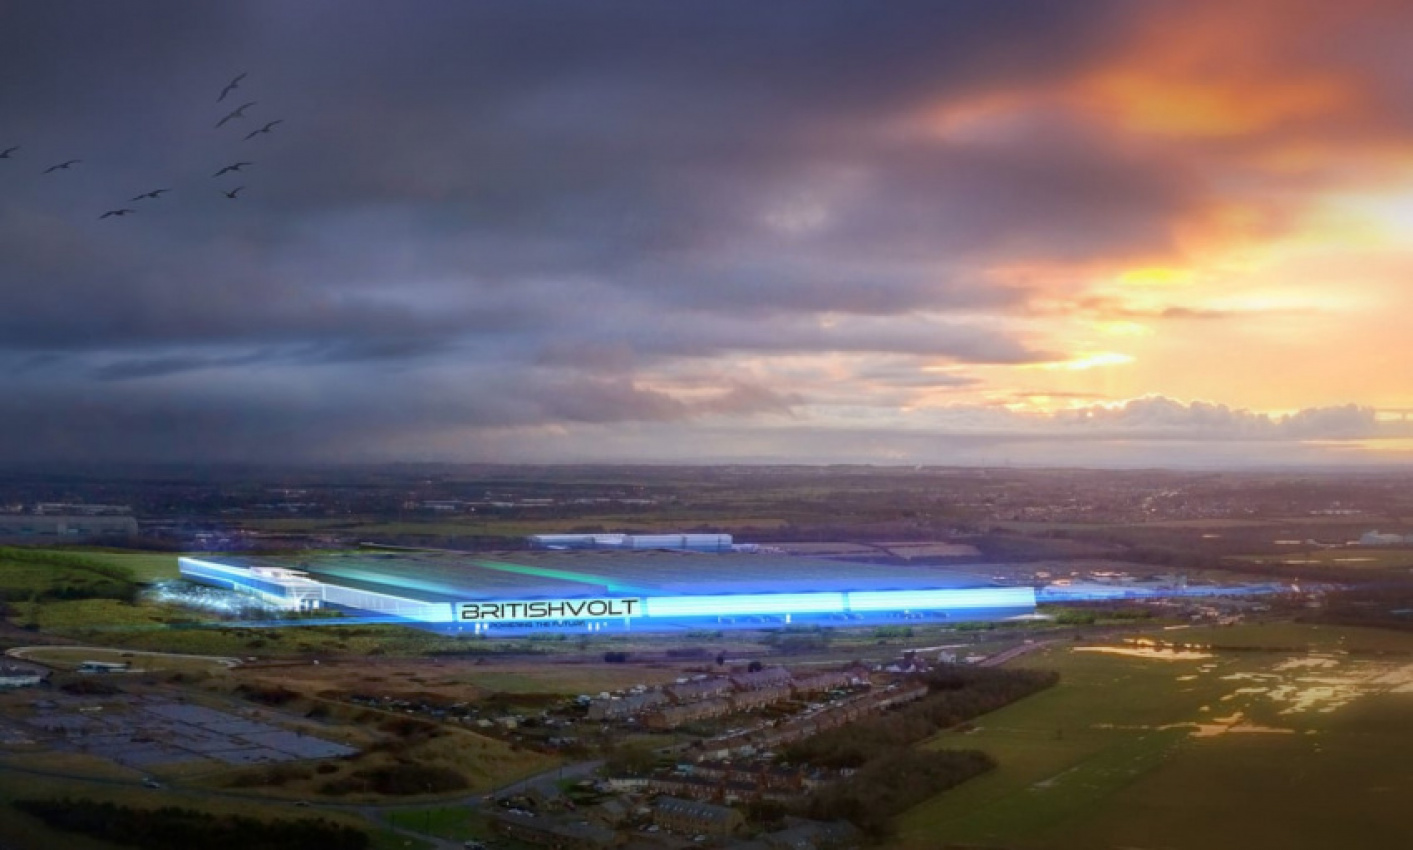 autos, cars, news, battery, electric vehicles, industry, reports, tech, battery start-up britishvolt preparing to build $5.1 billion gigafactory in the uk